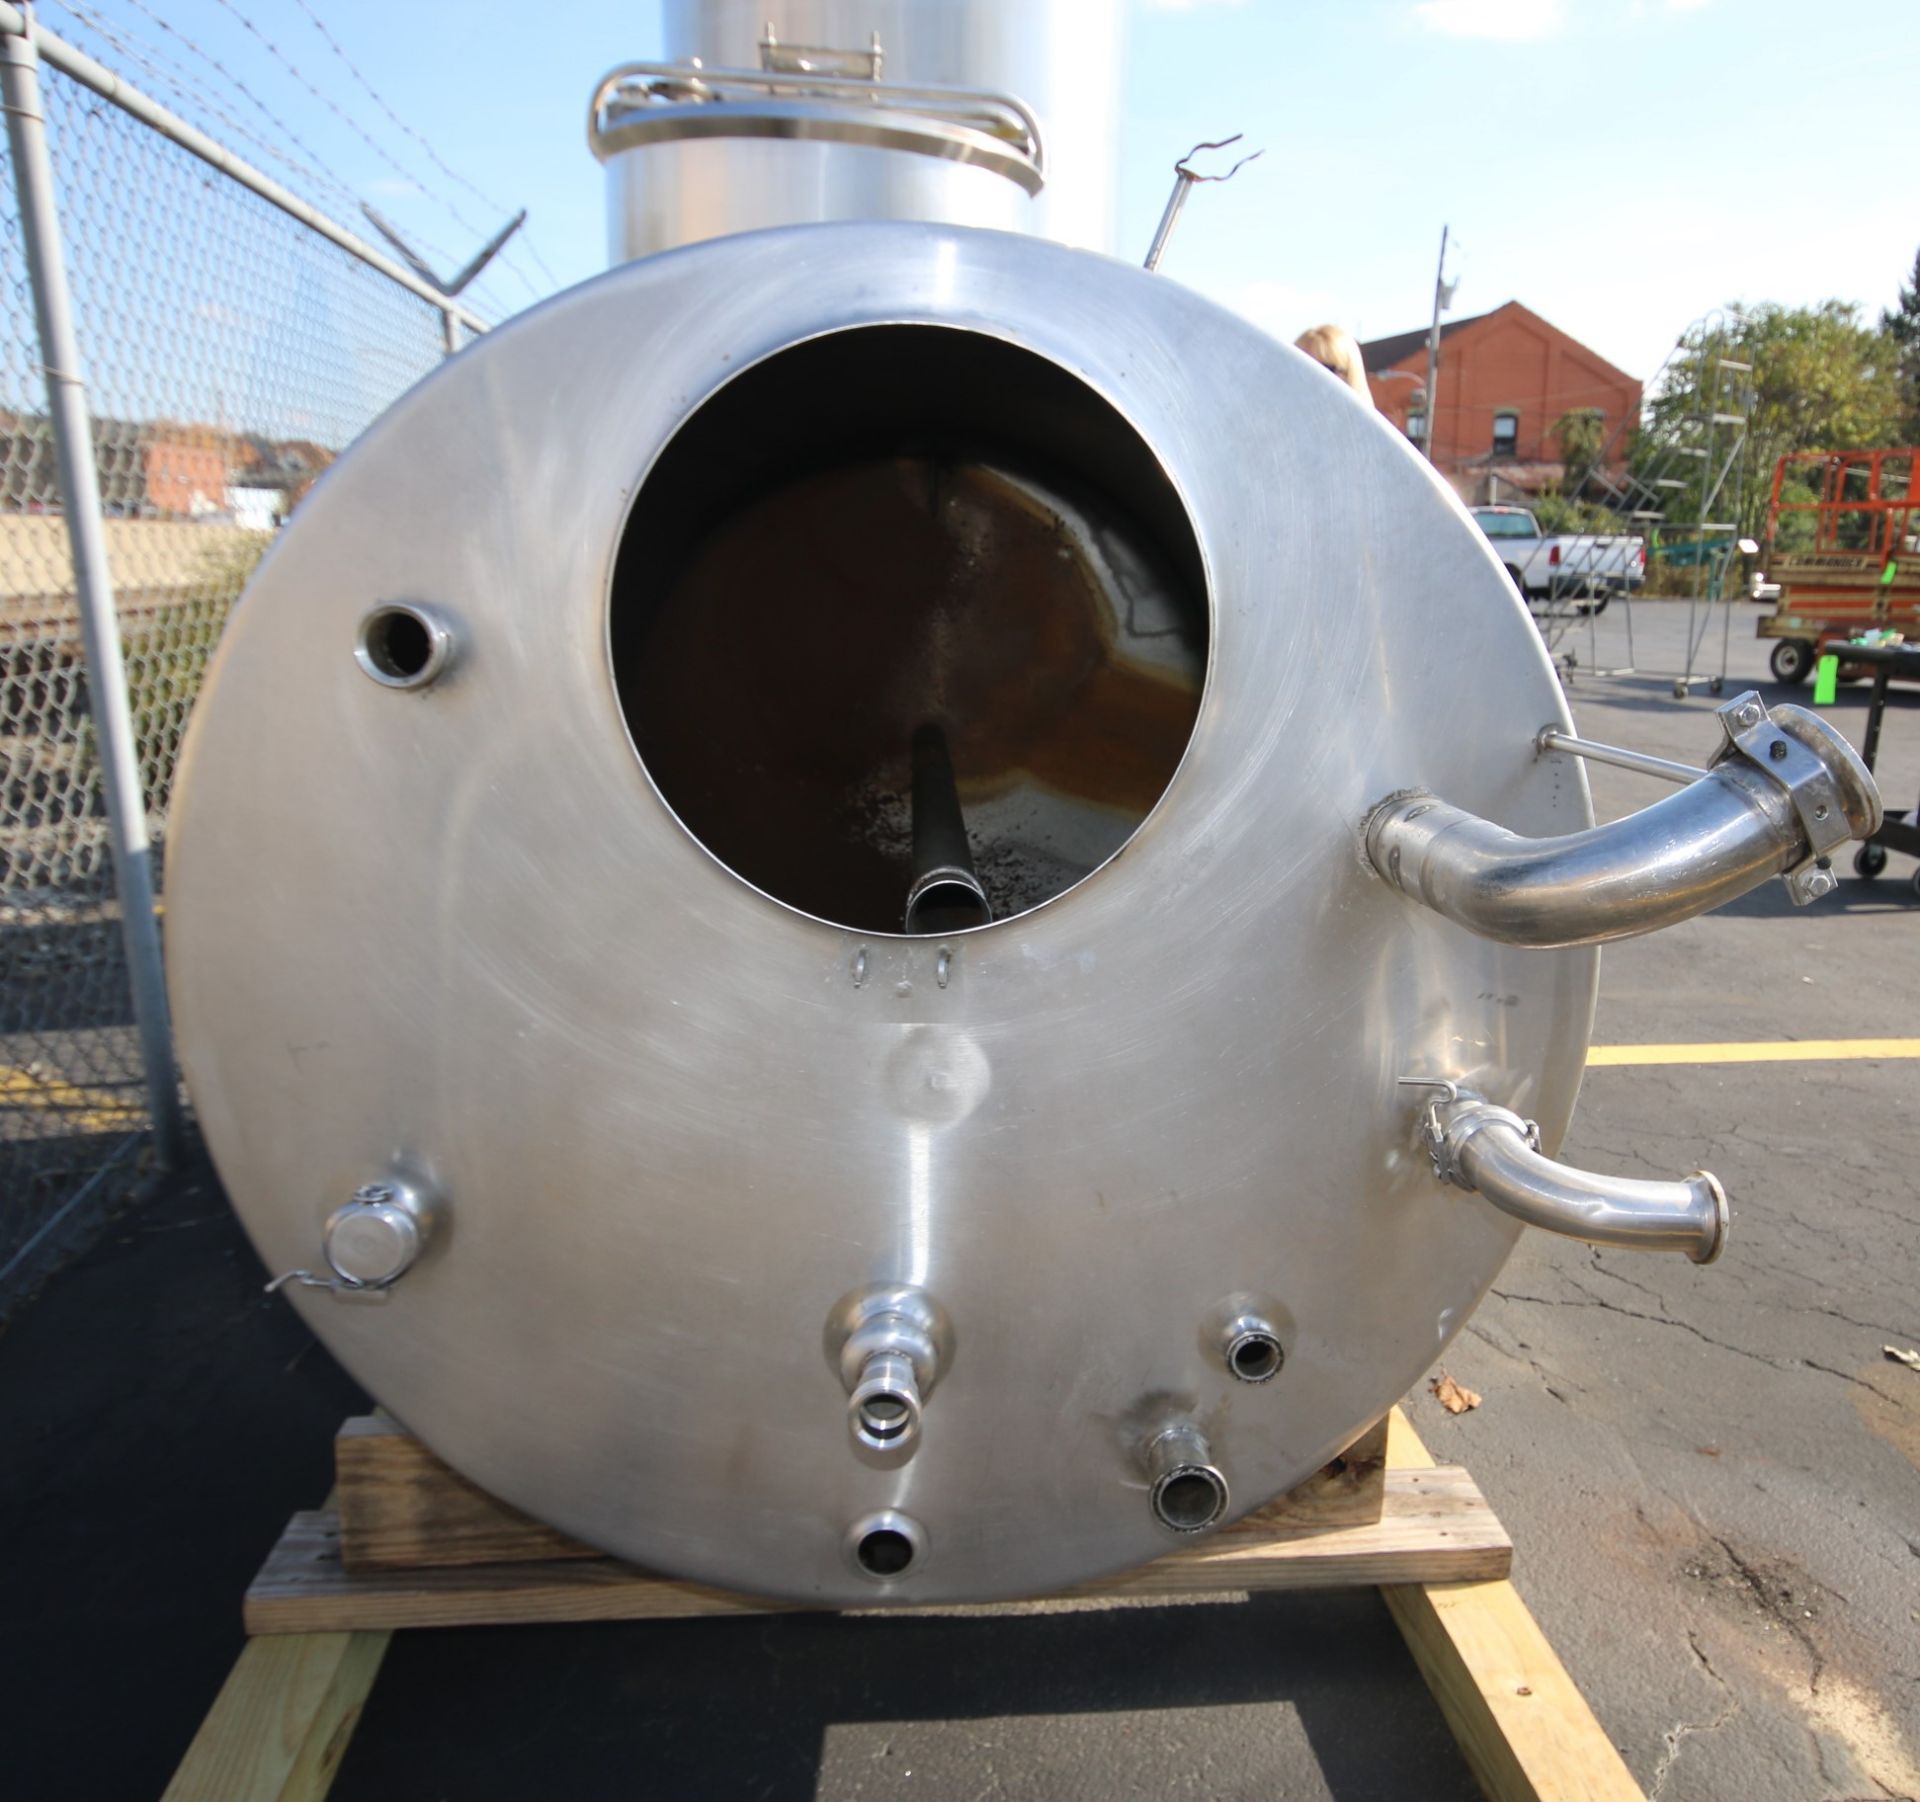 Approx 500 Gallon, verticle S/S CIP Tank, with Top Access Door, Mounted on S/S Legs, Overall - Image 3 of 3